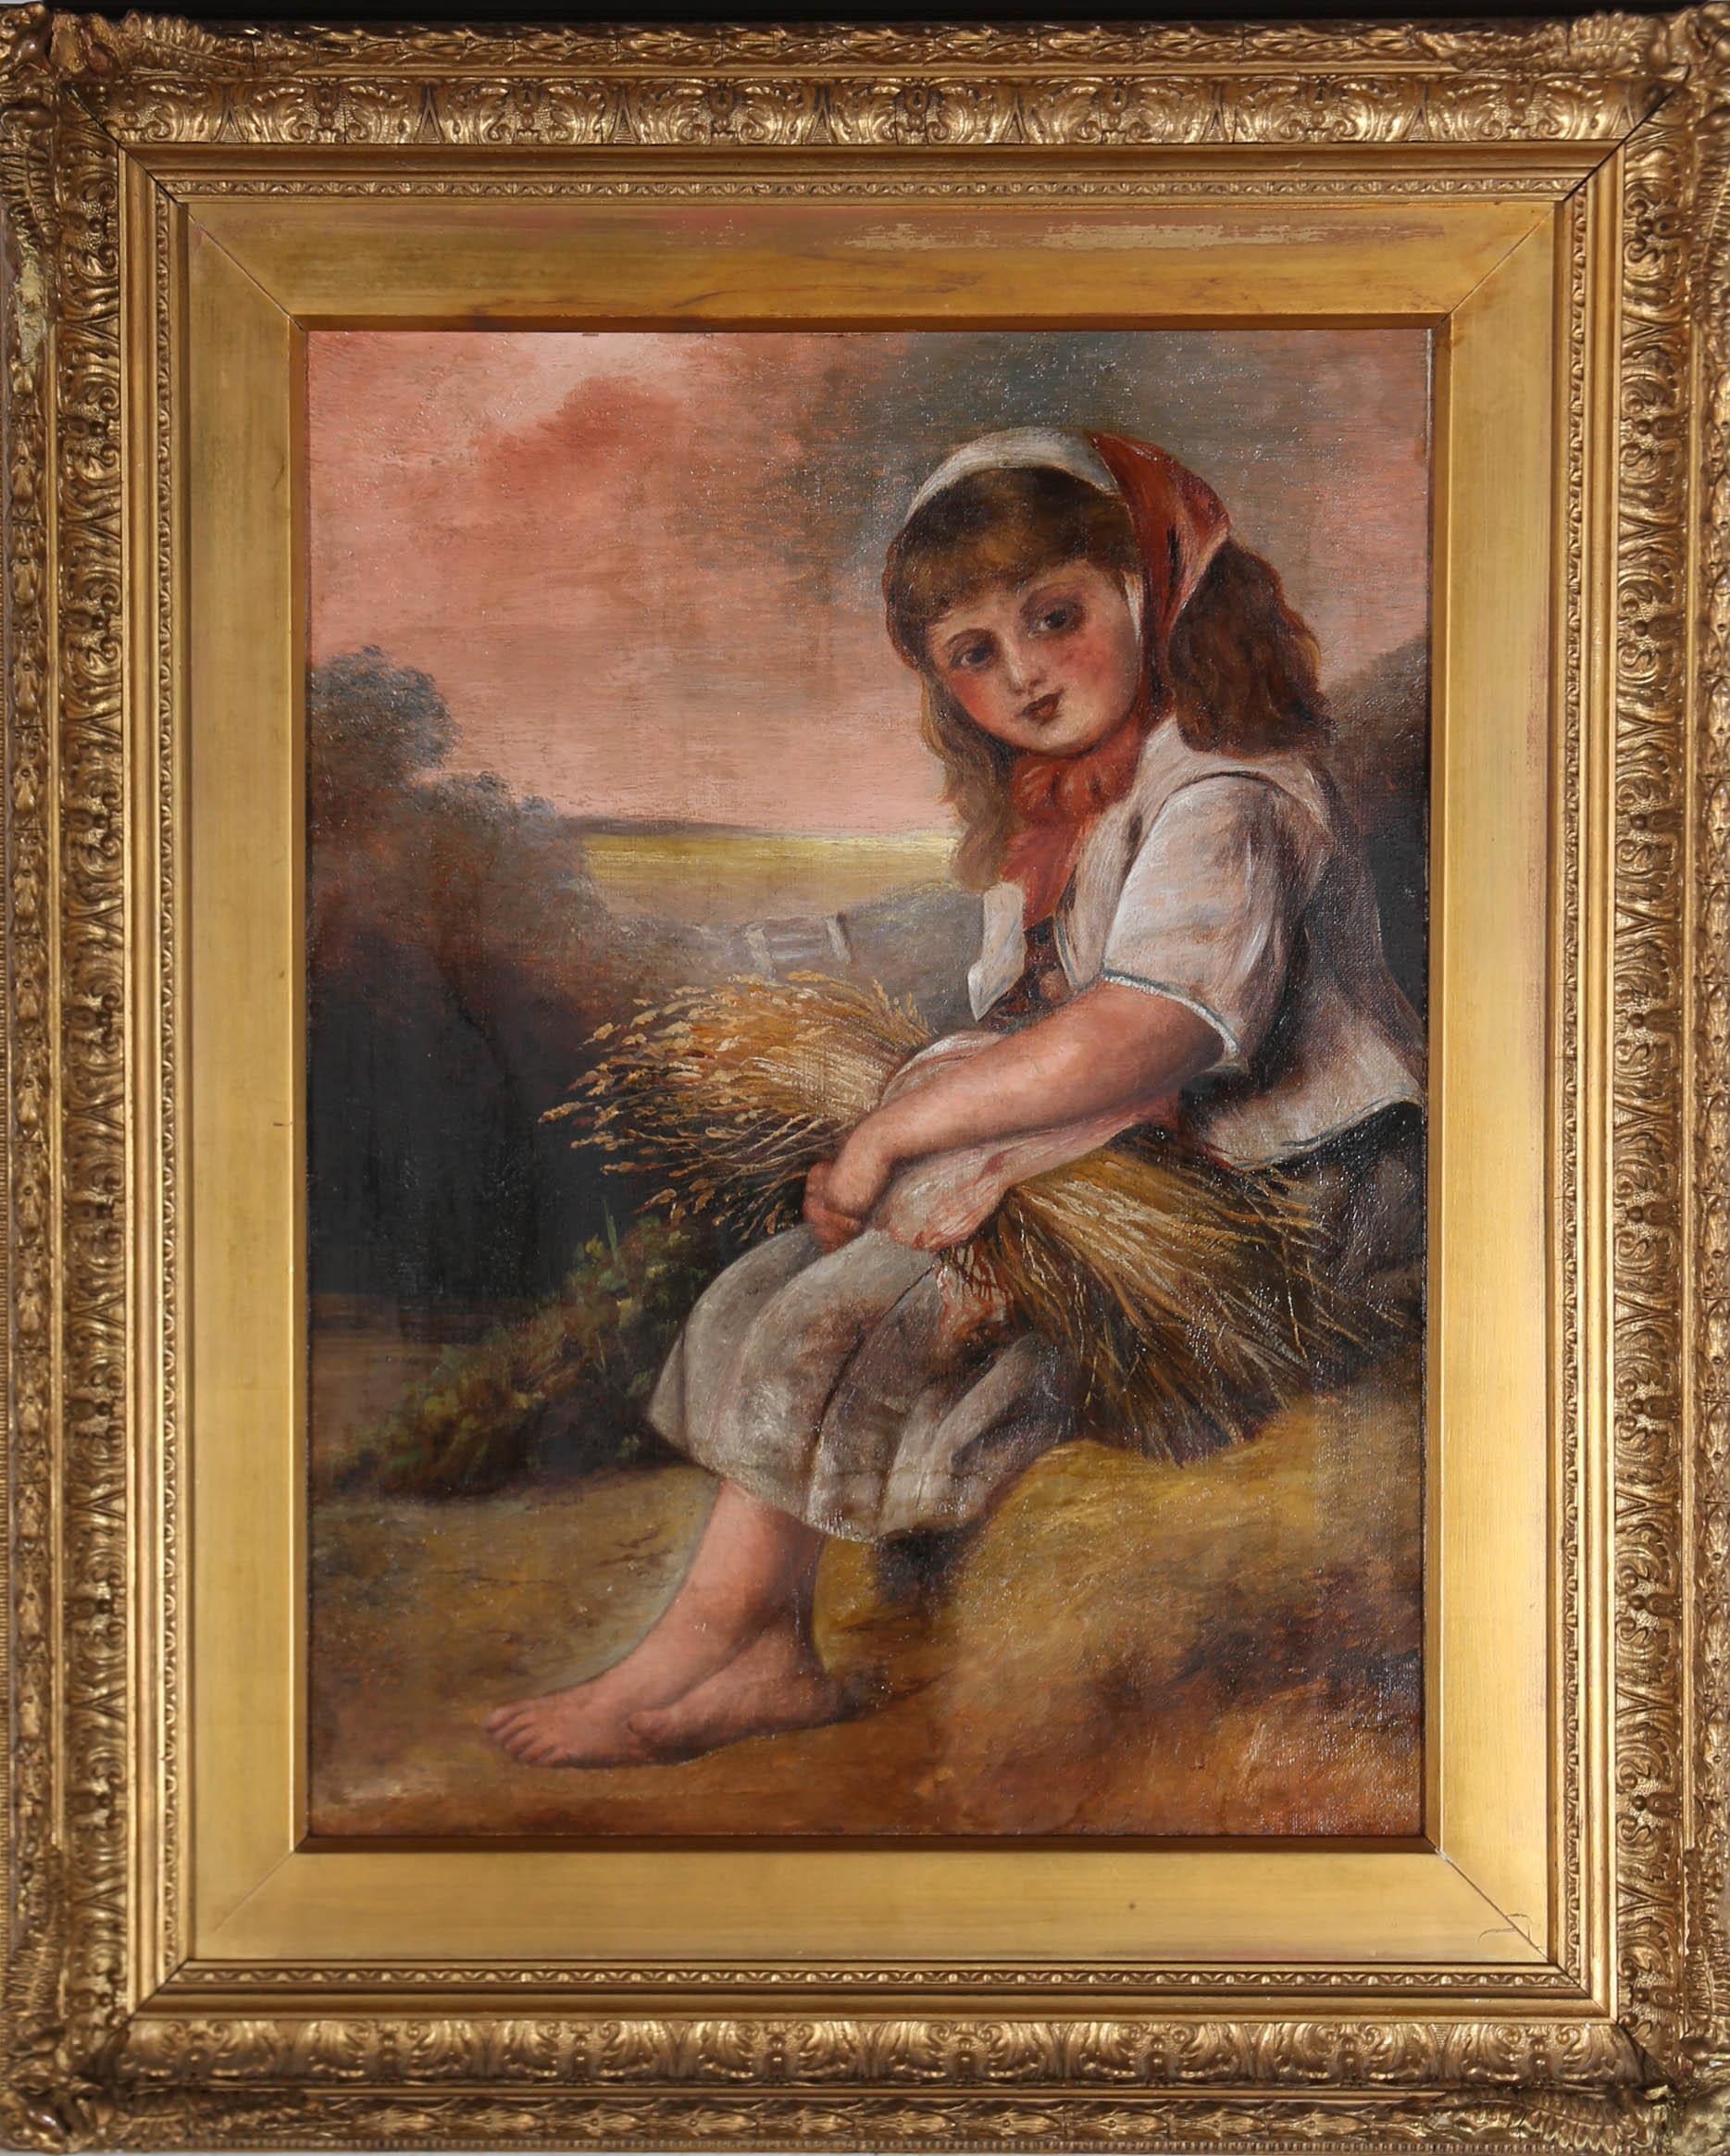 Unknown Figurative Painting - Mid 19th Century Oil - Girl with Wheat Sheaf